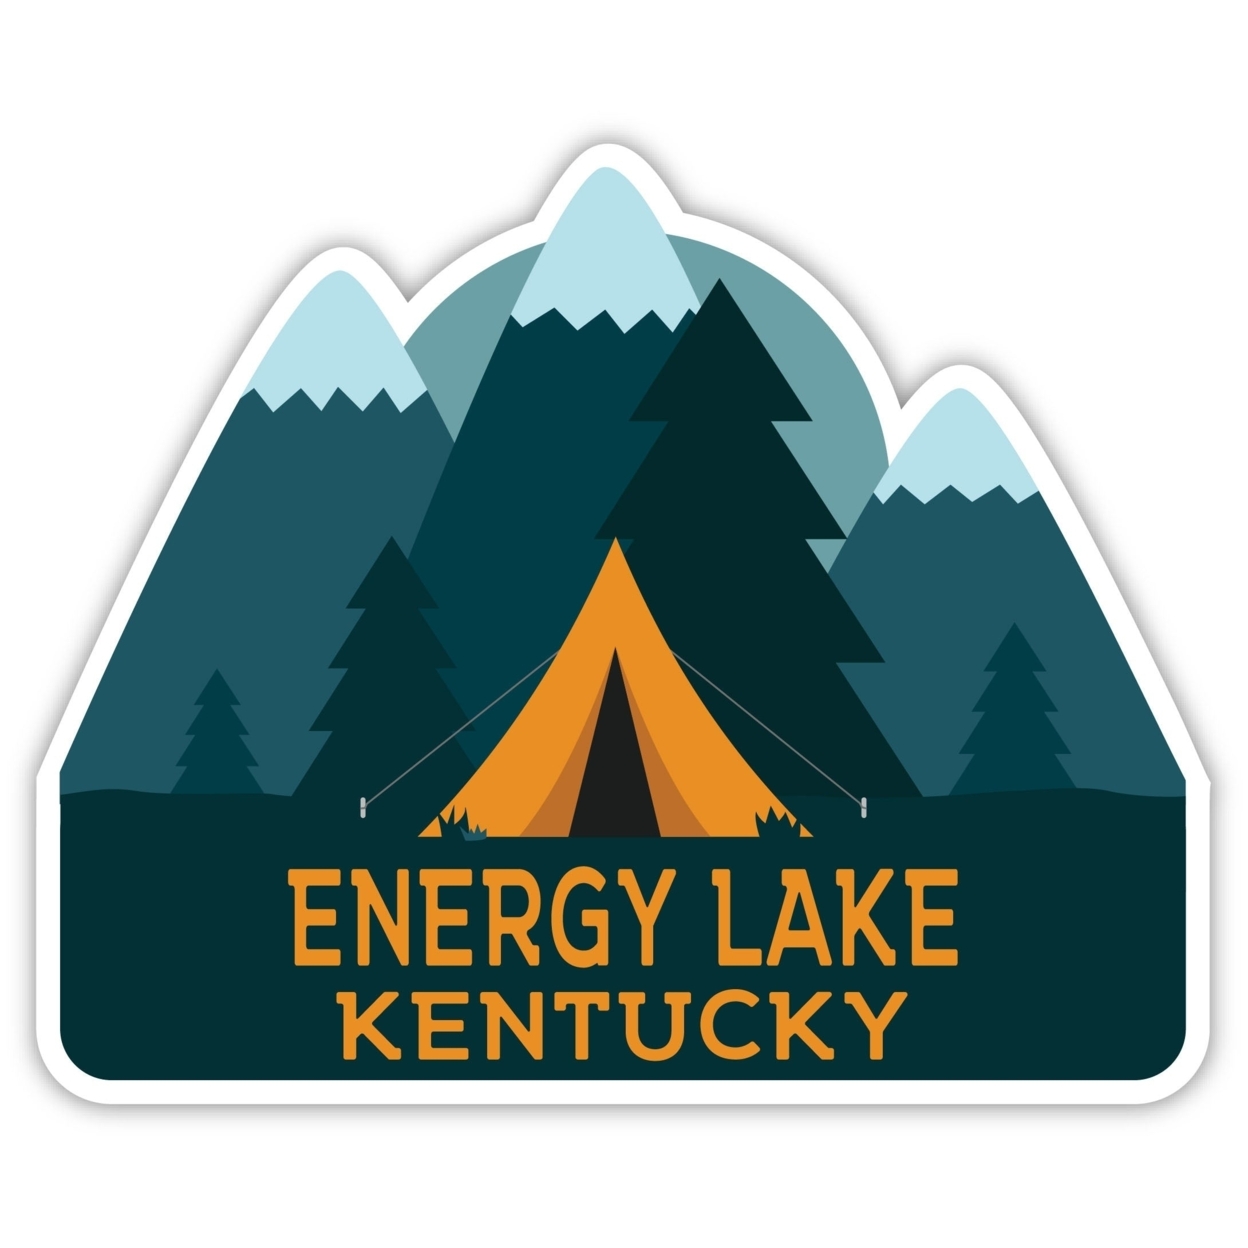 Energy Lake Kentucky Souvenir Decorative Stickers (Choose Theme And Size) - 4-Pack, 8-Inch, Tent